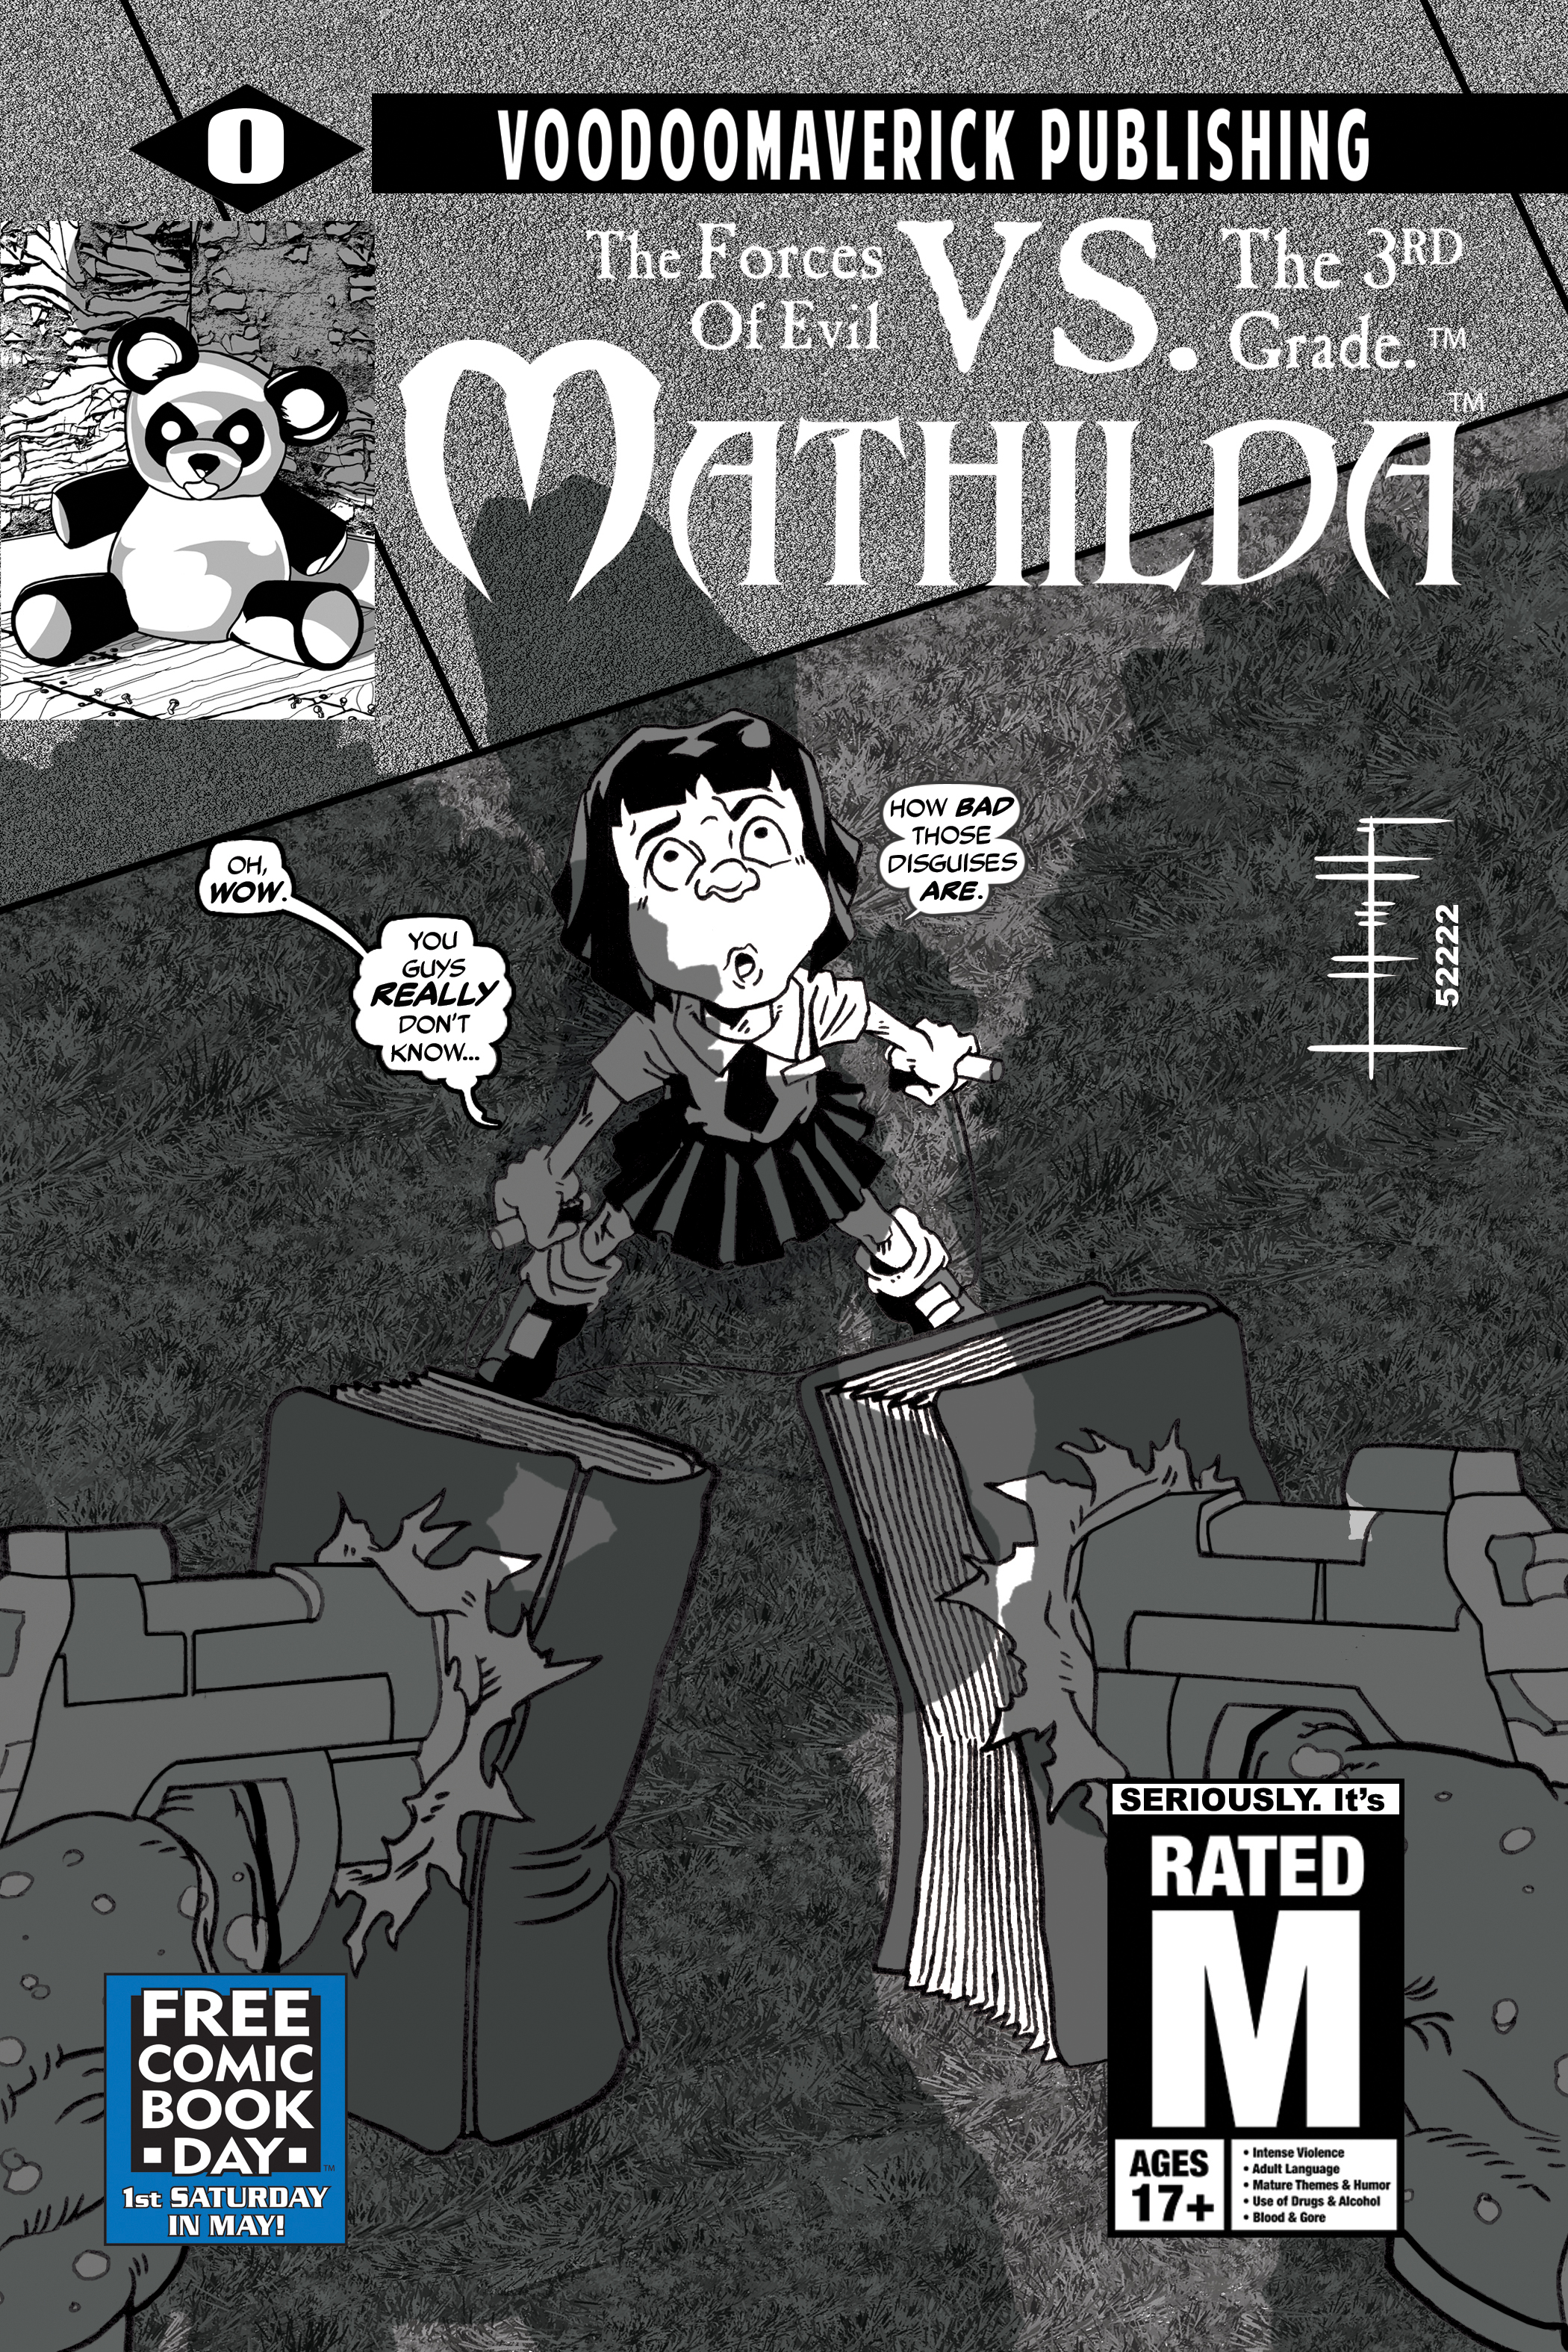 Mathilda: The Forces of Evil vs. The 3rd Grade- FREE Comic Book Day